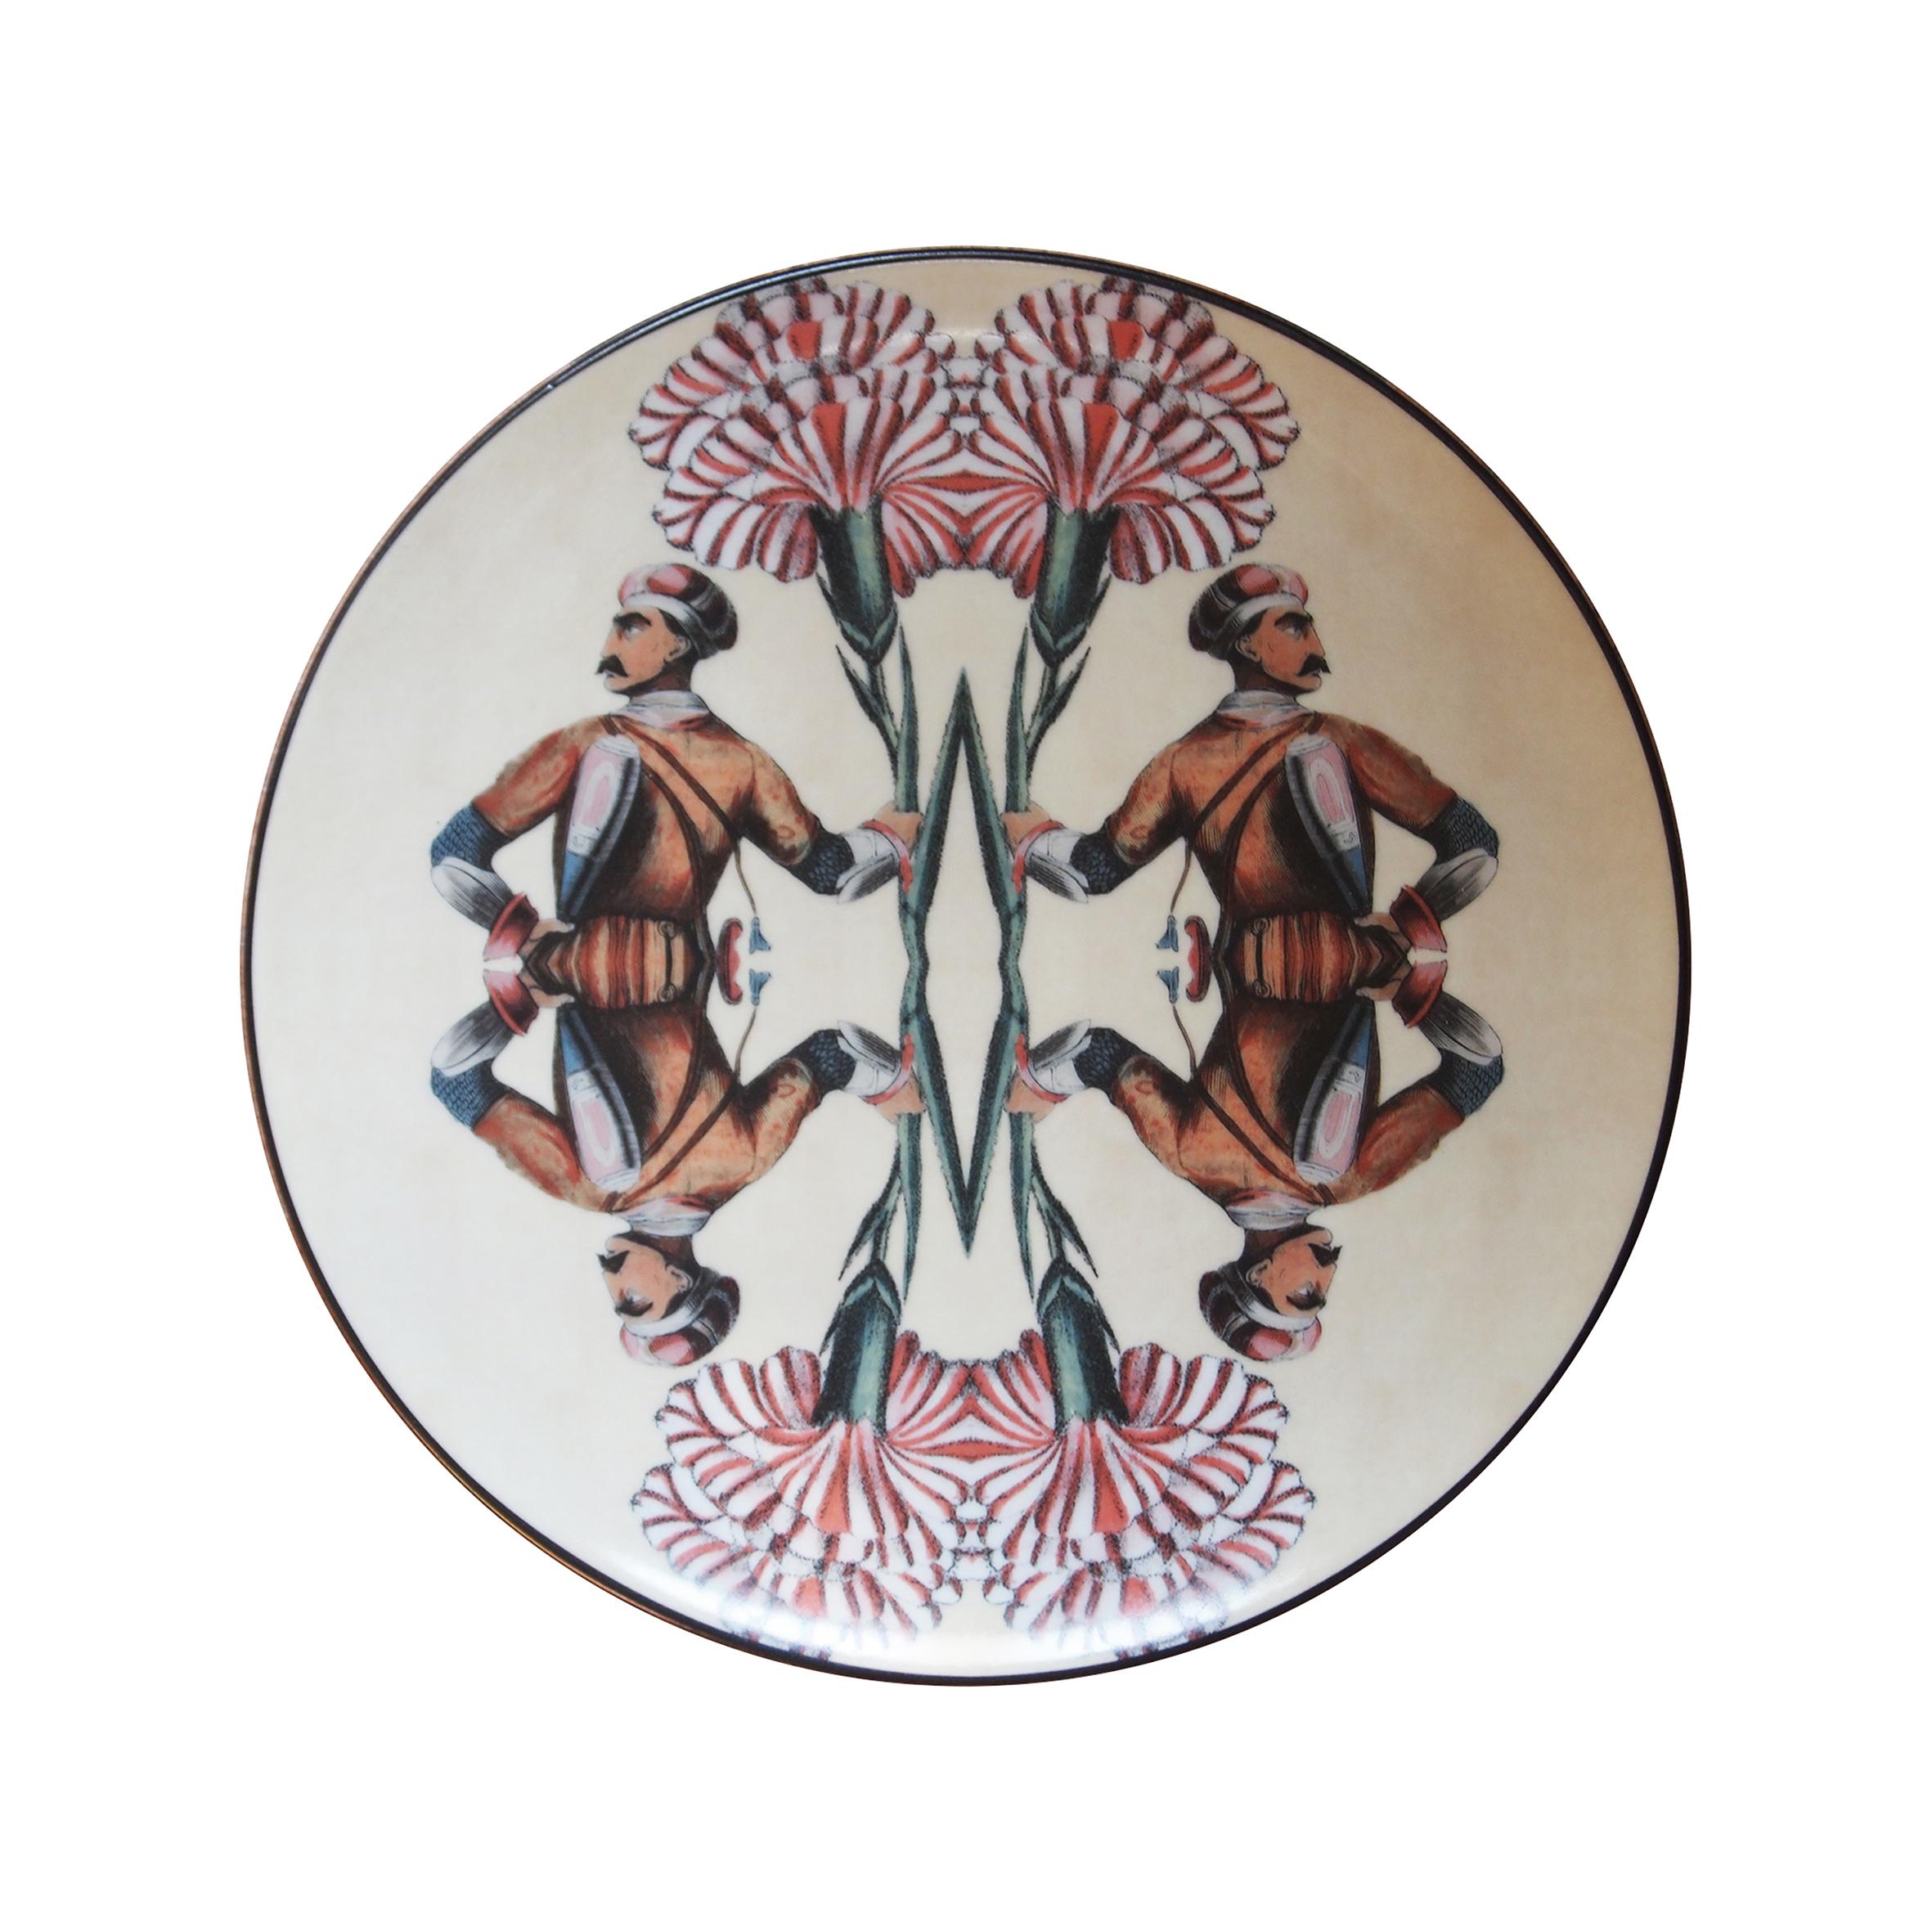 Sultan's Journey Soldier Porcelain Plate by Patch NYC for Les-Ottomans